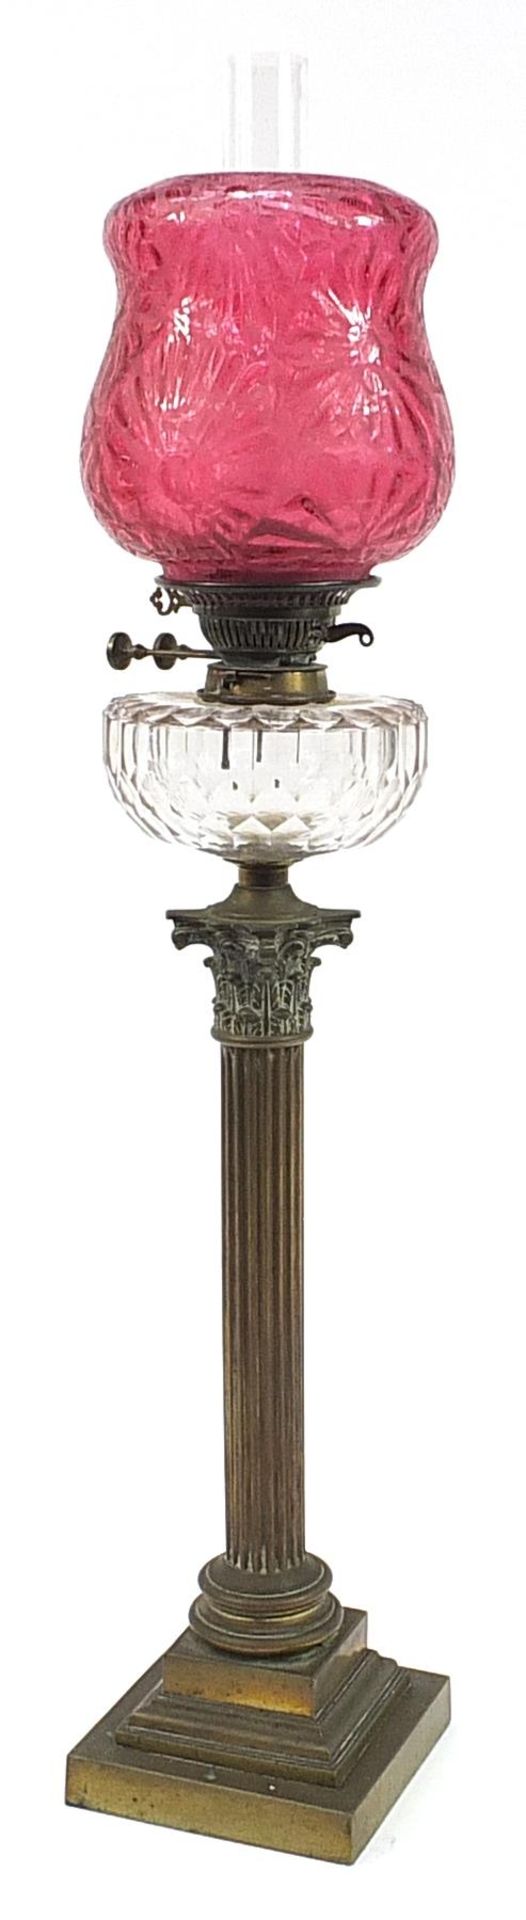 Victorian brass Corinthian column oil lamp with cranberry glass shade and clear glass reservoir,